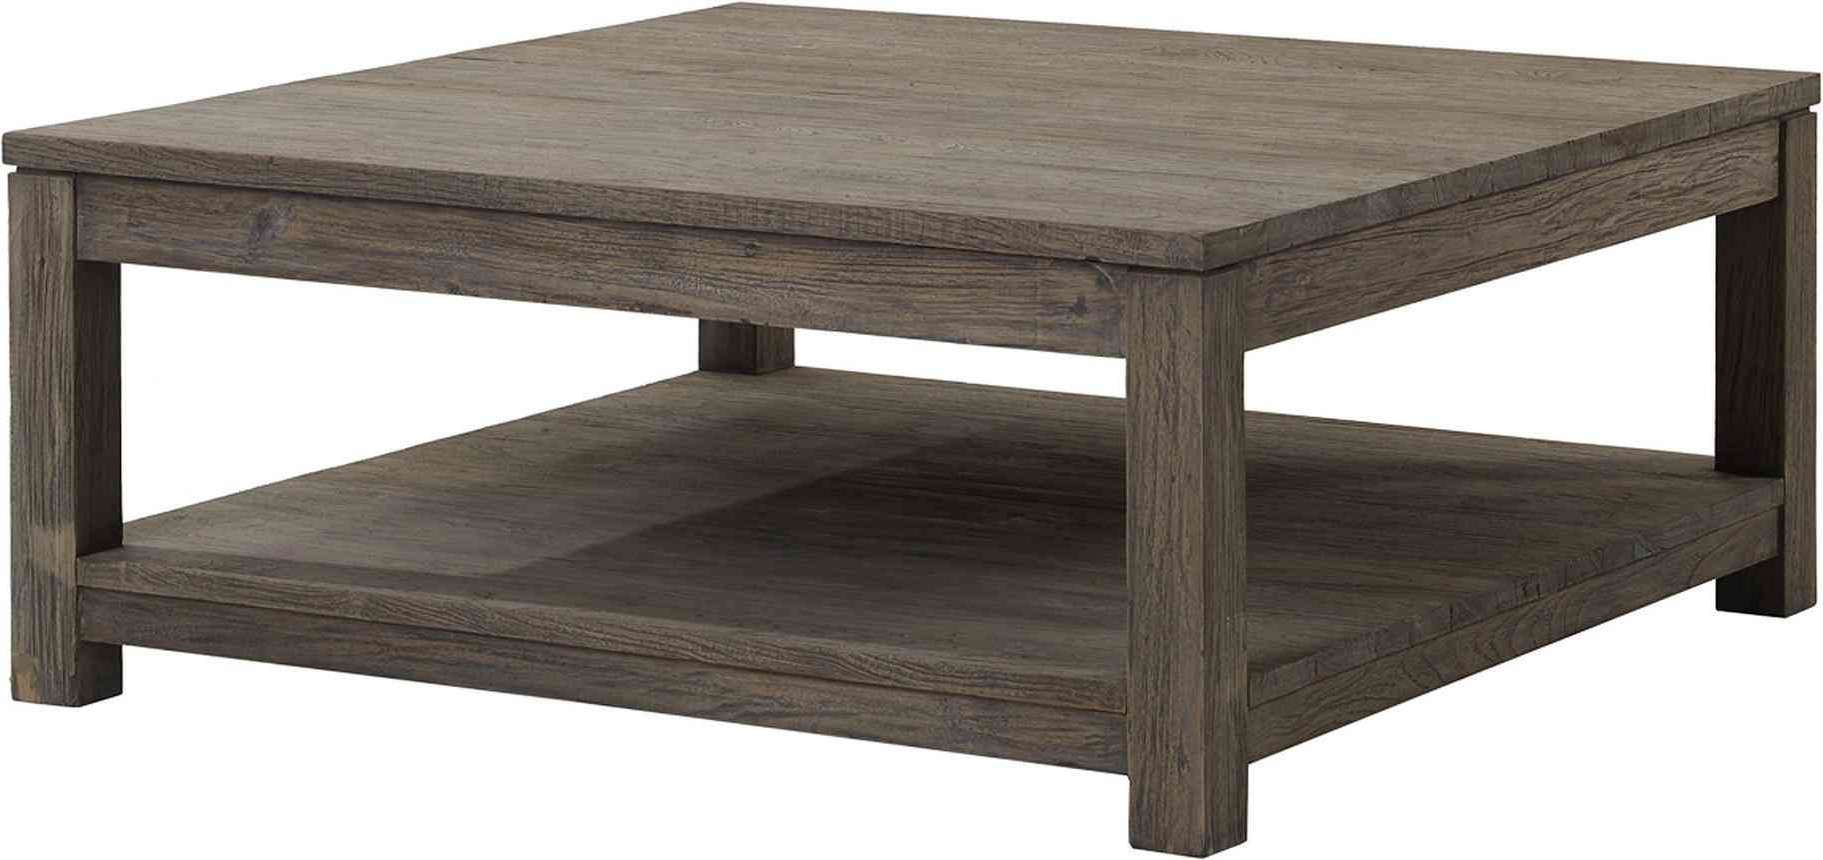 Coffee Tables : Square Coffee Tables Living Room Table Cheap For Inside Well Known Large Square Coffee Tables (Gallery 2 of 20)